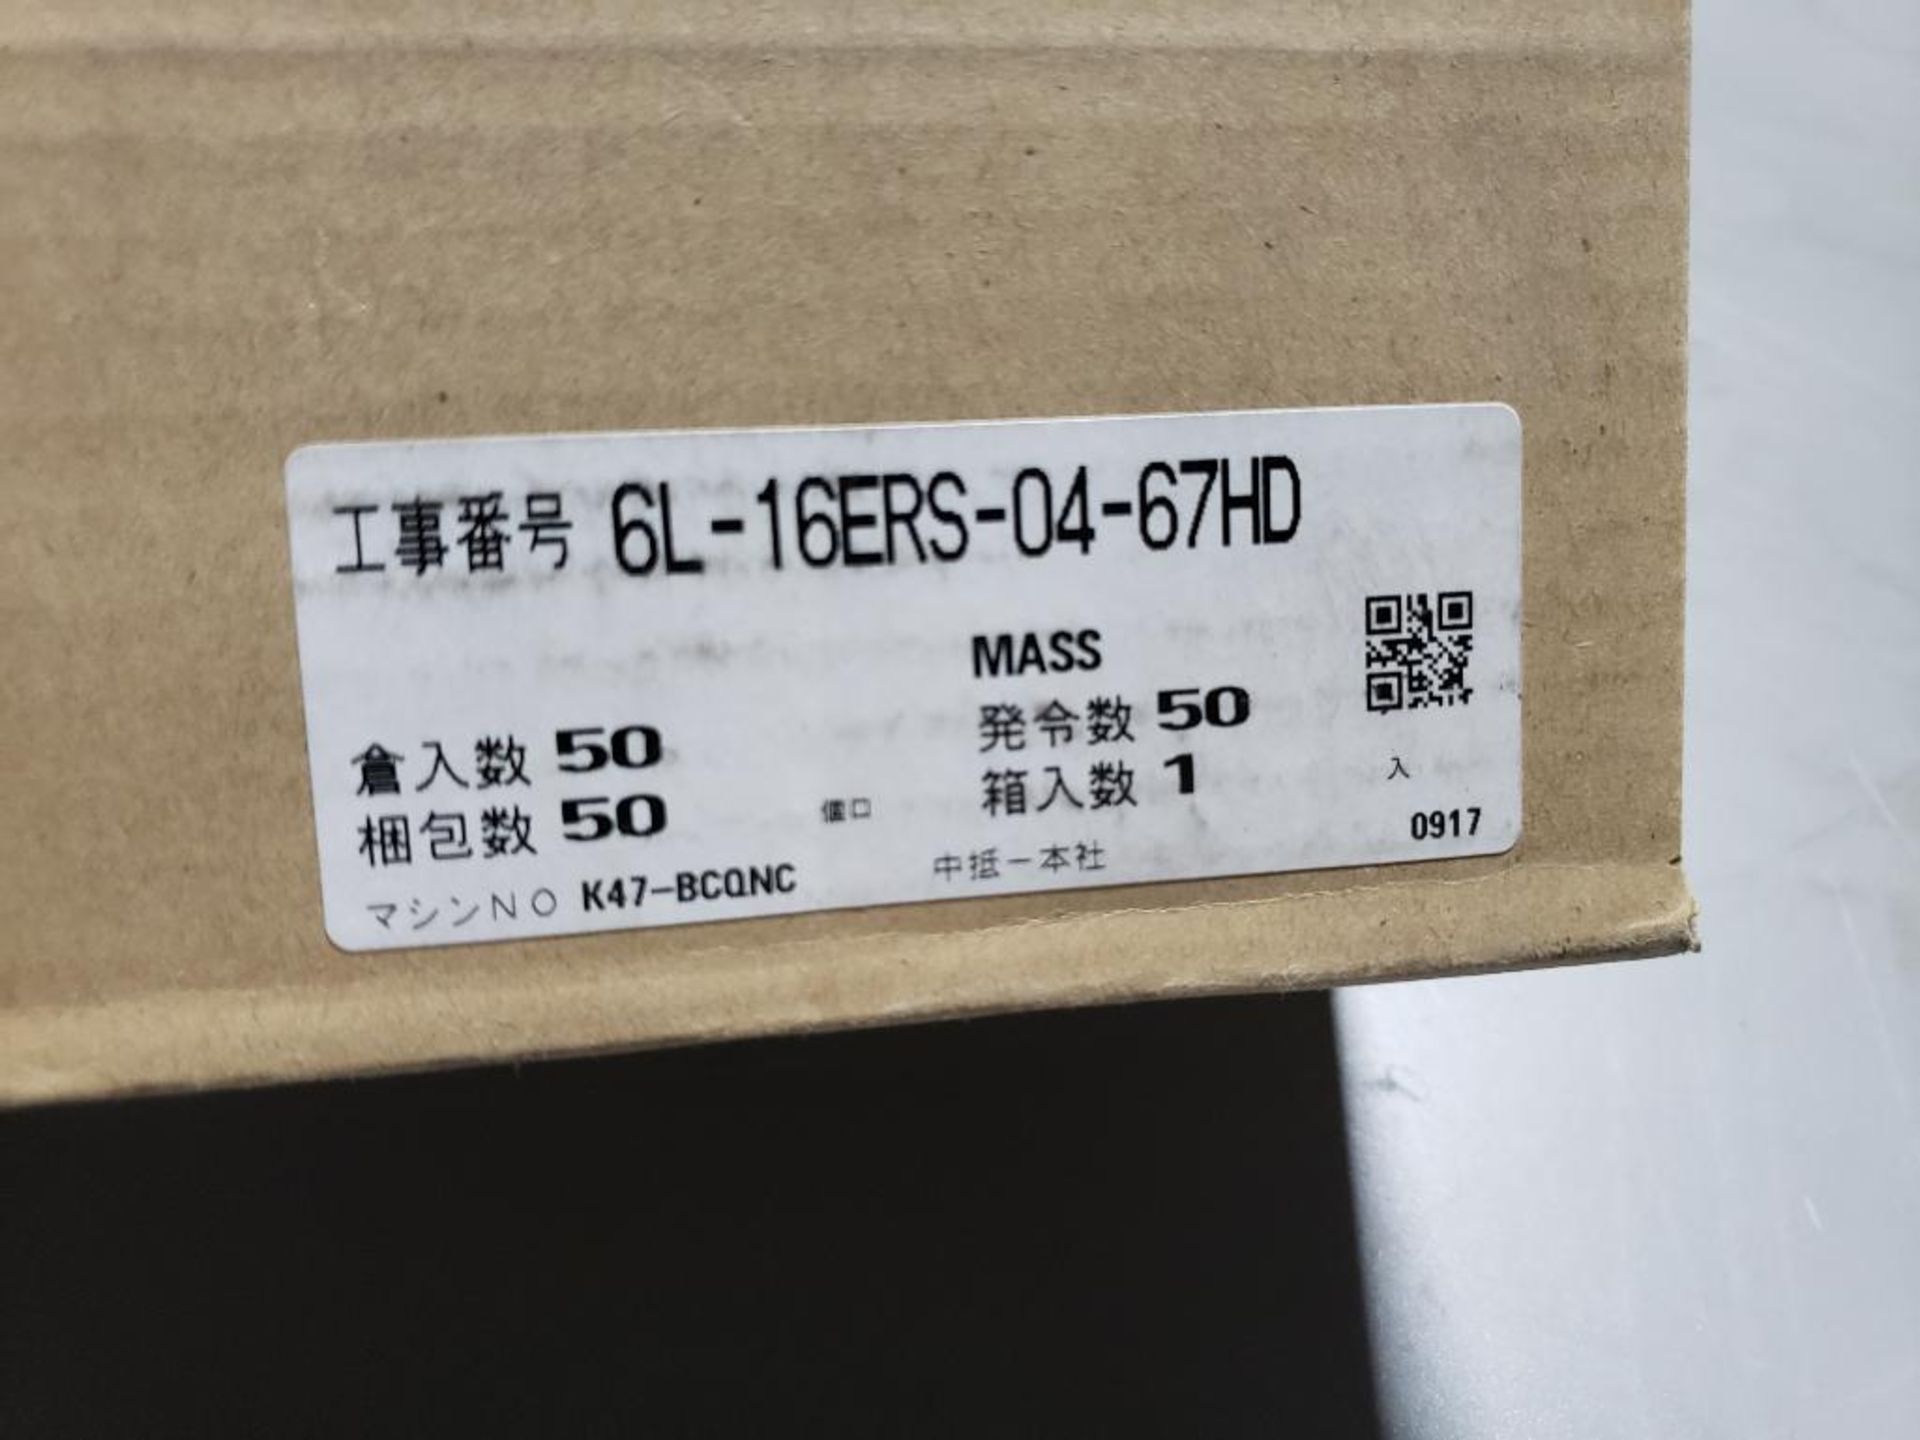 Mitsubishi inverter drive. Part number FR-D720-042-W1. New in box. - Image 3 of 4